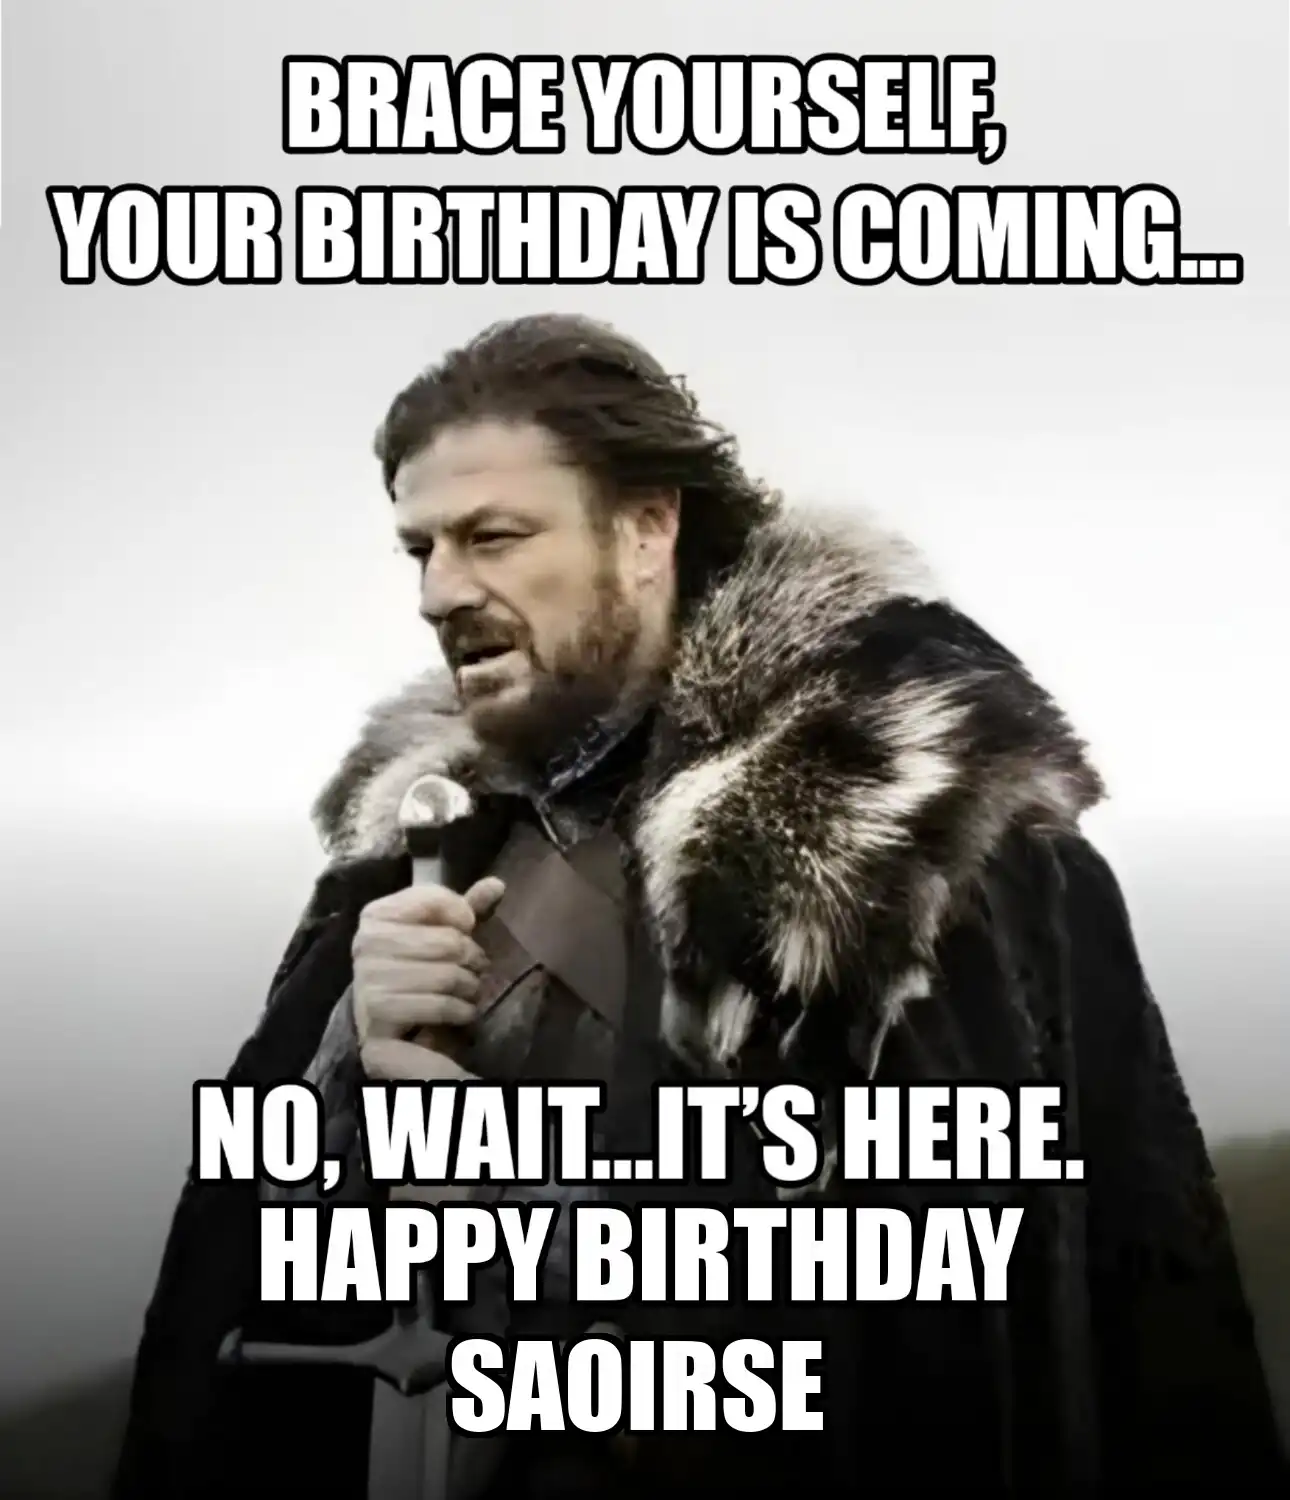 Happy Birthday Saoirse Brace Yourself Your Birthday Is Coming Meme